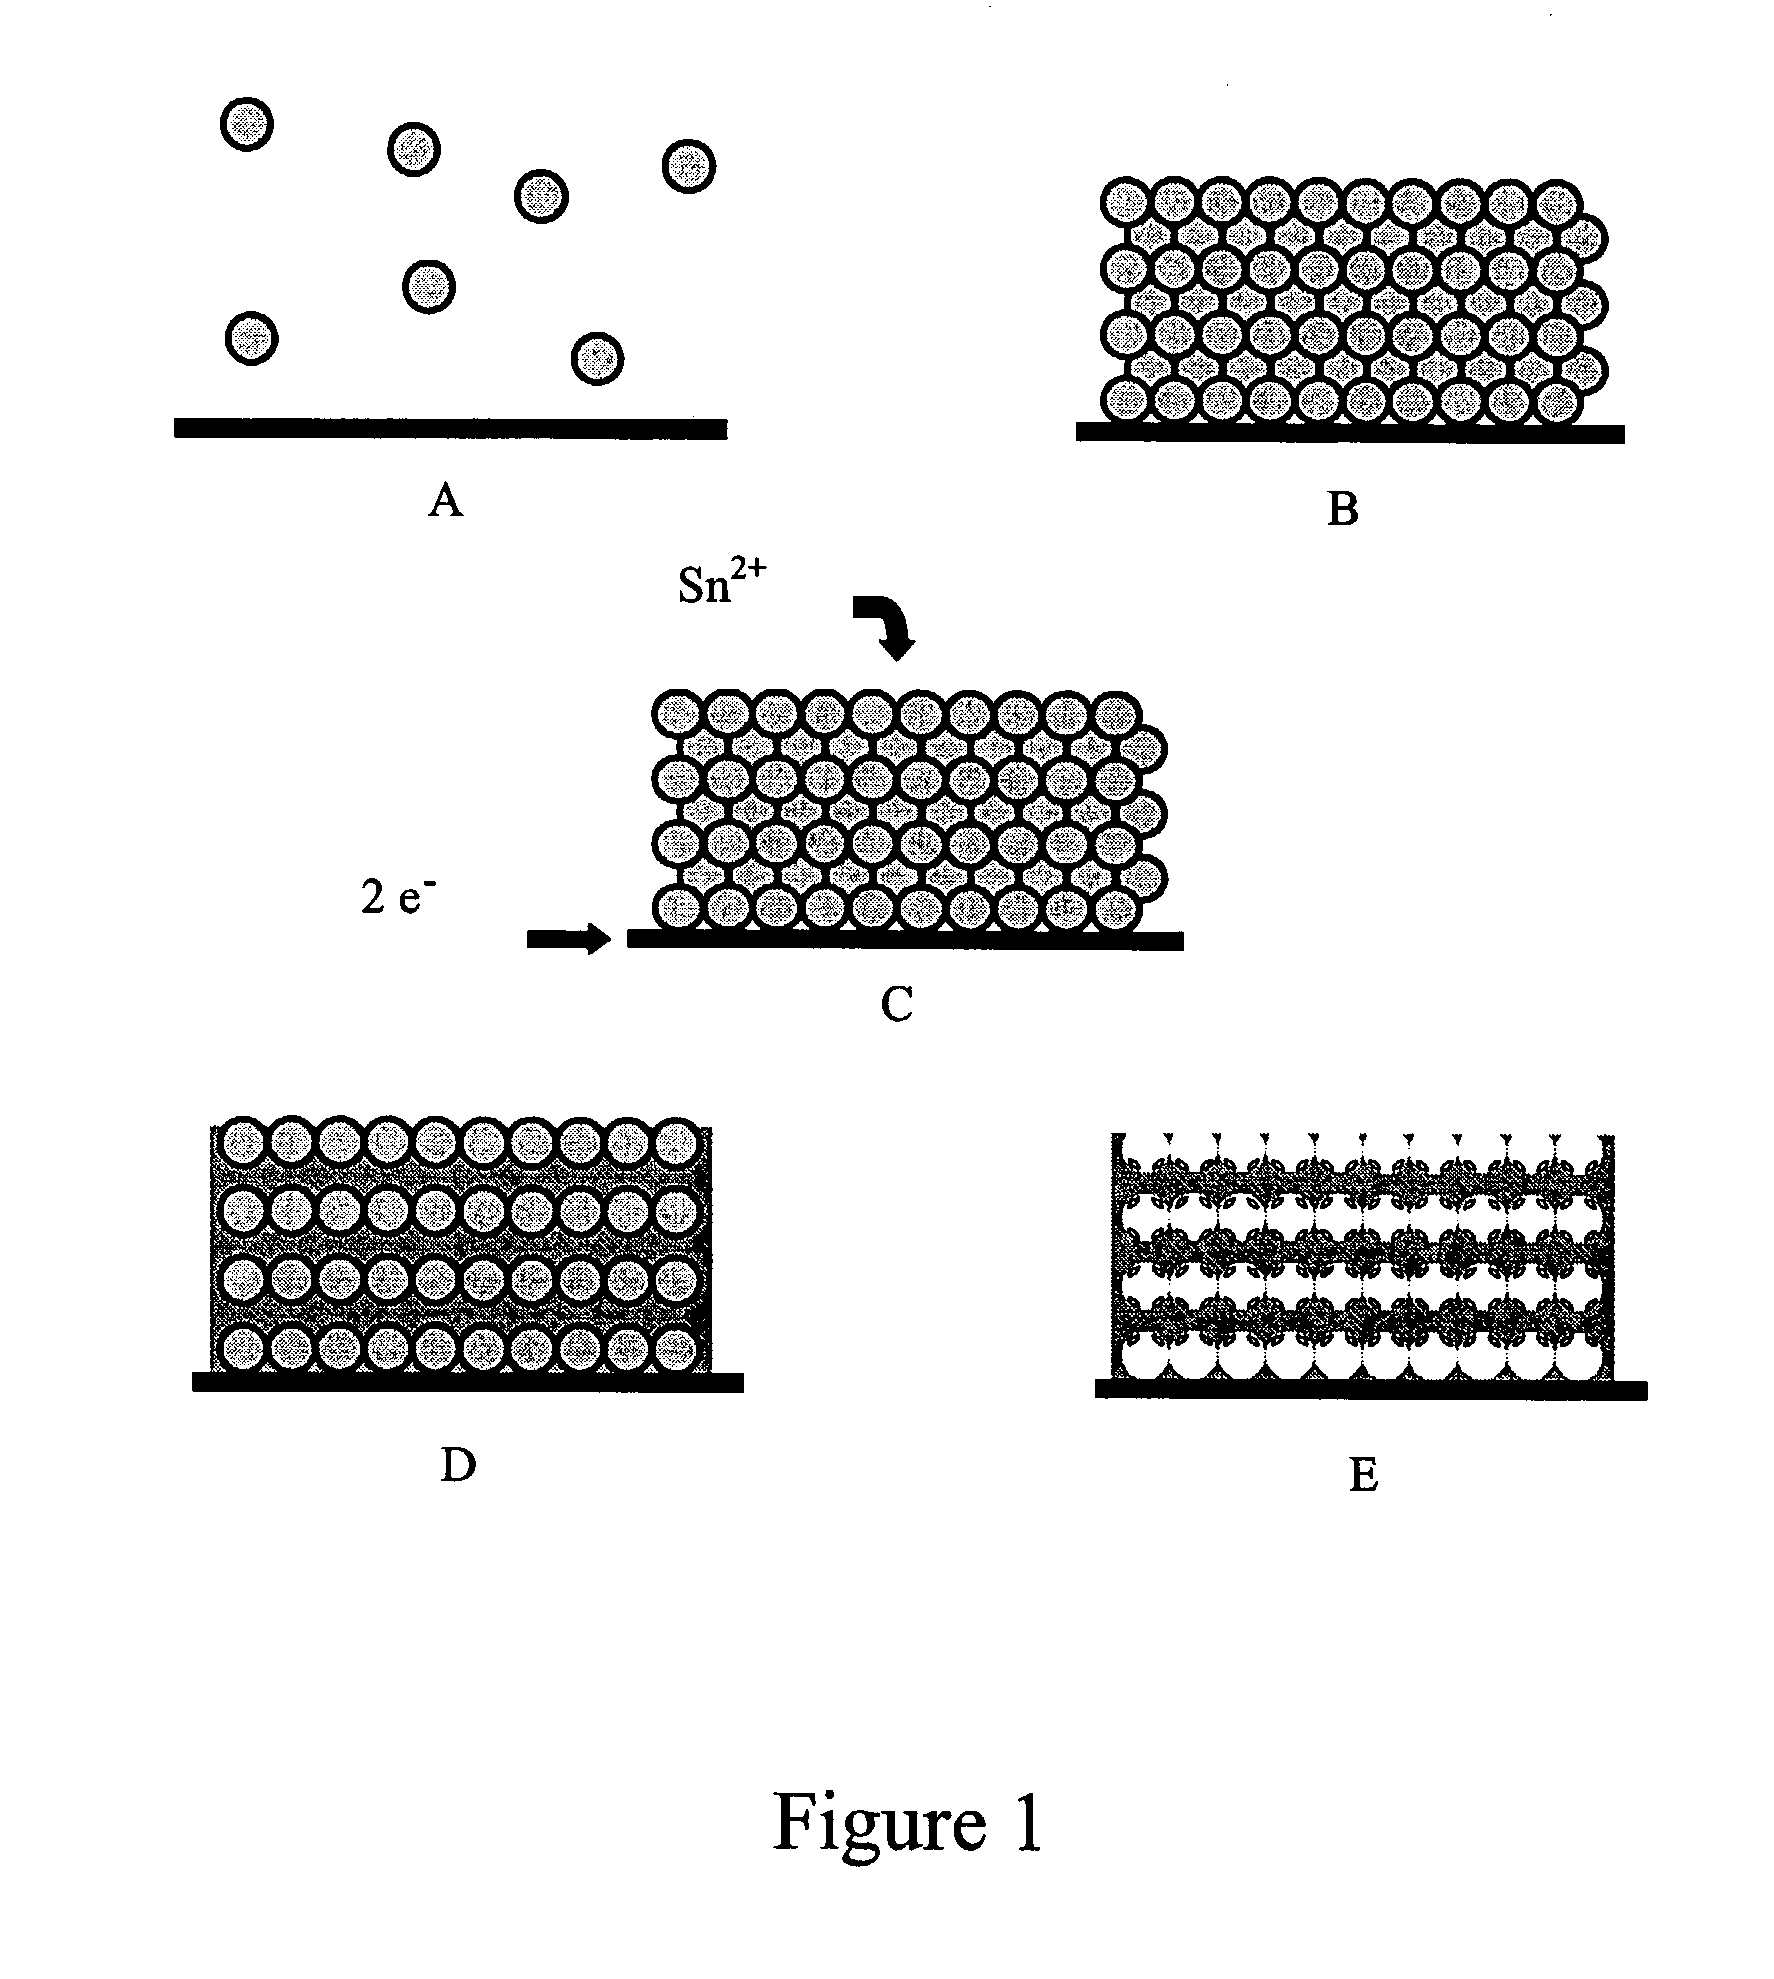 Colloidal sphere templates and sphere-templated porous materials